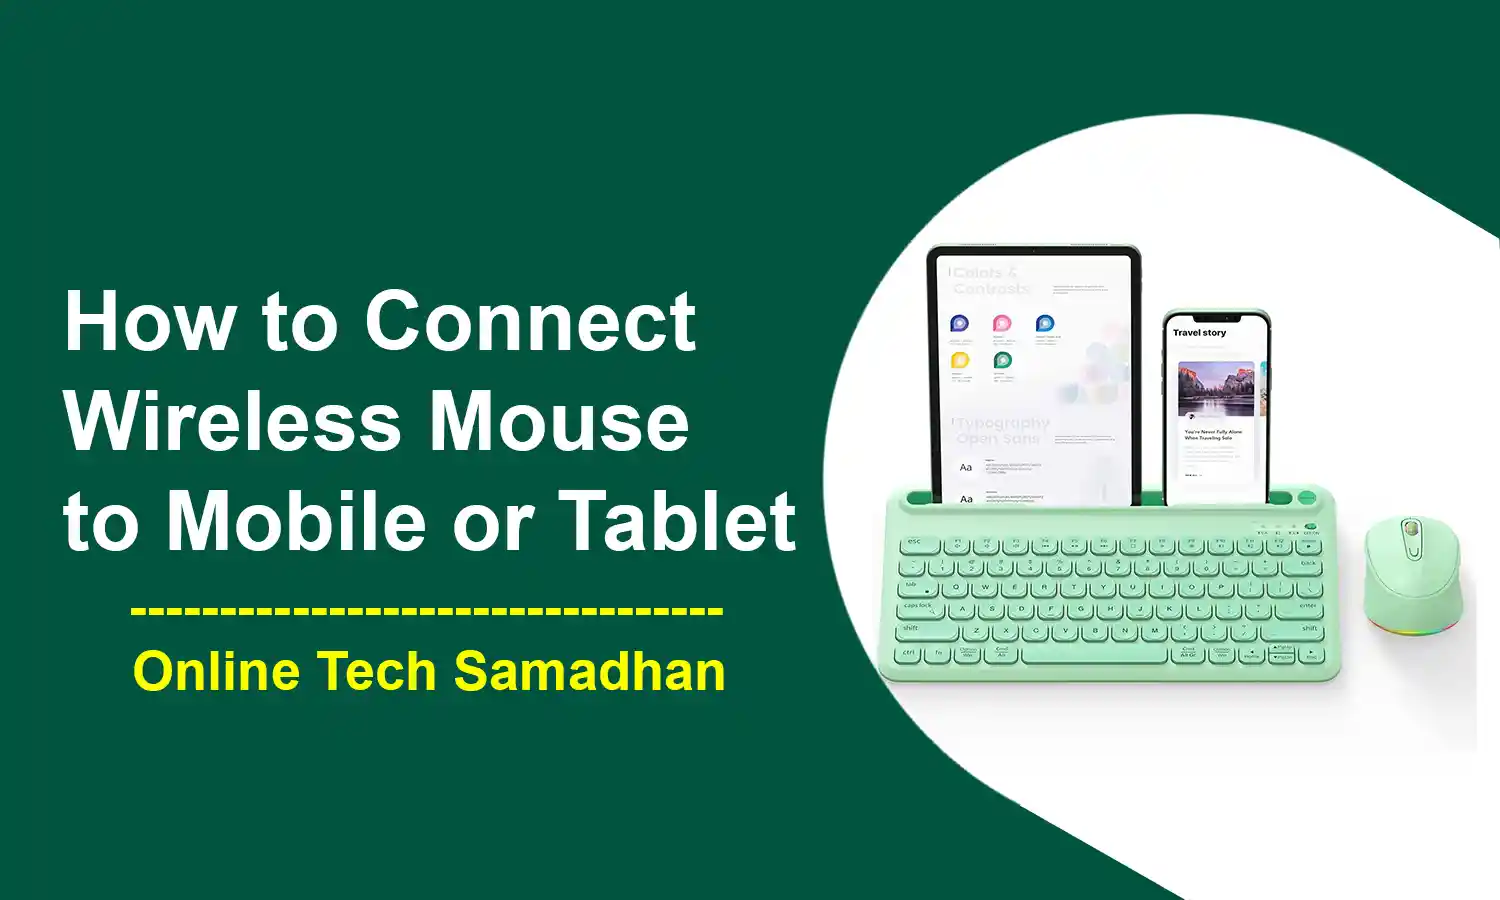 How to Connect Wireless Mouse to Mobile